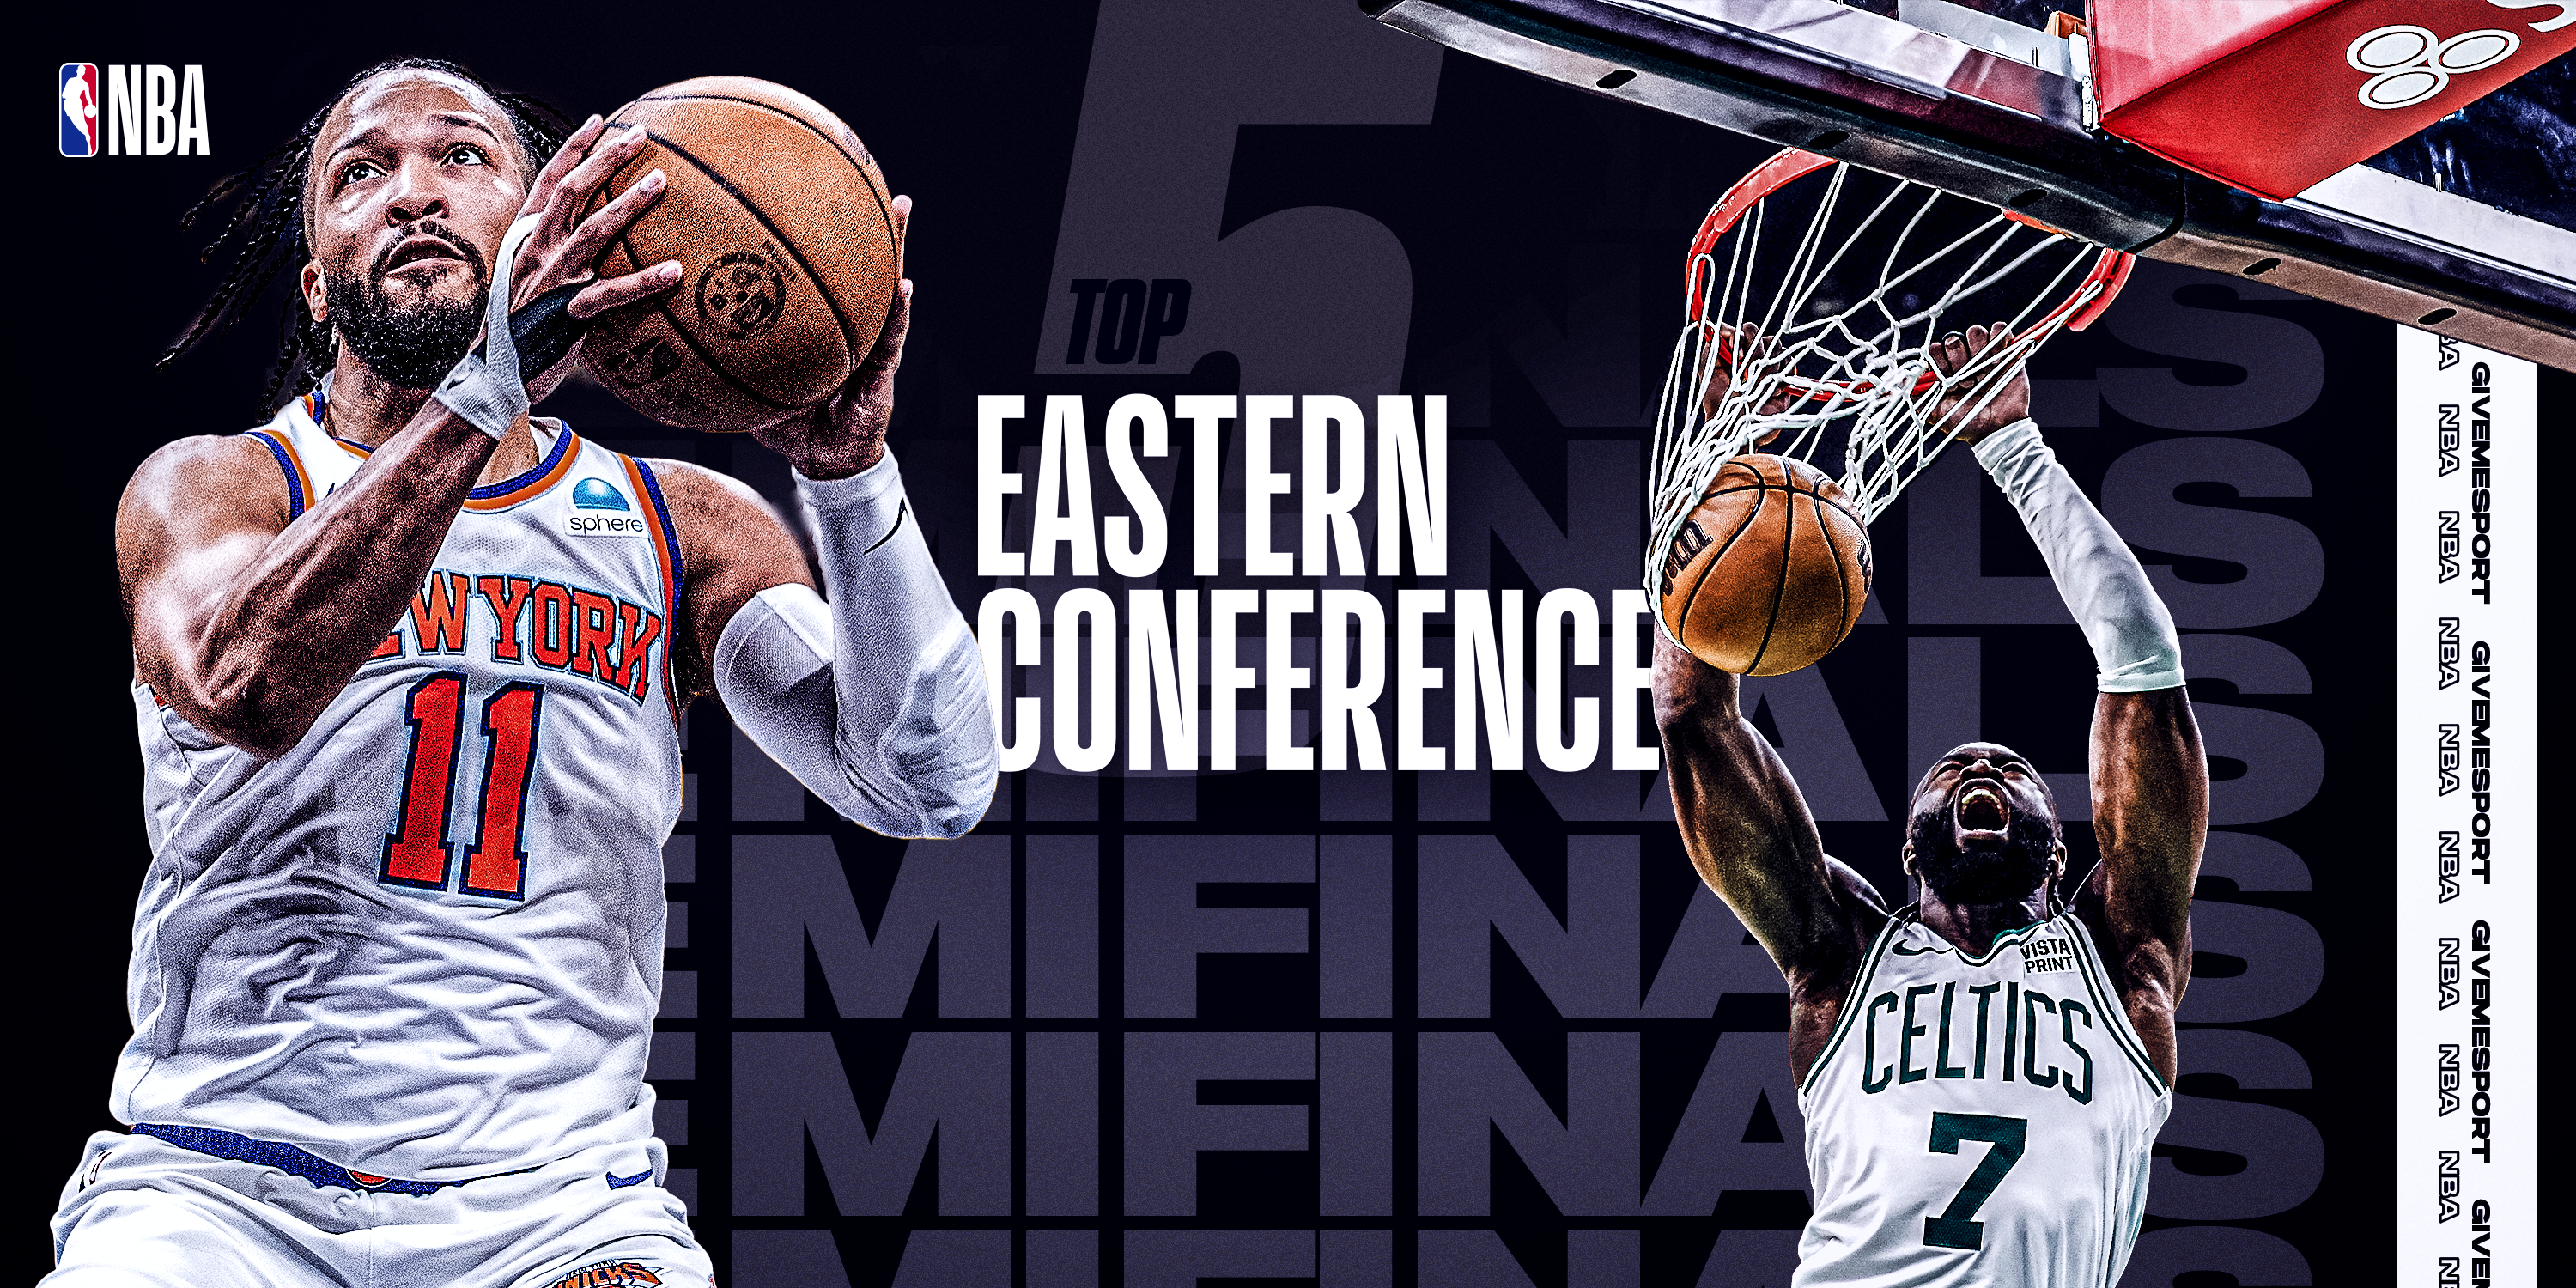 Eastern conference semifinals